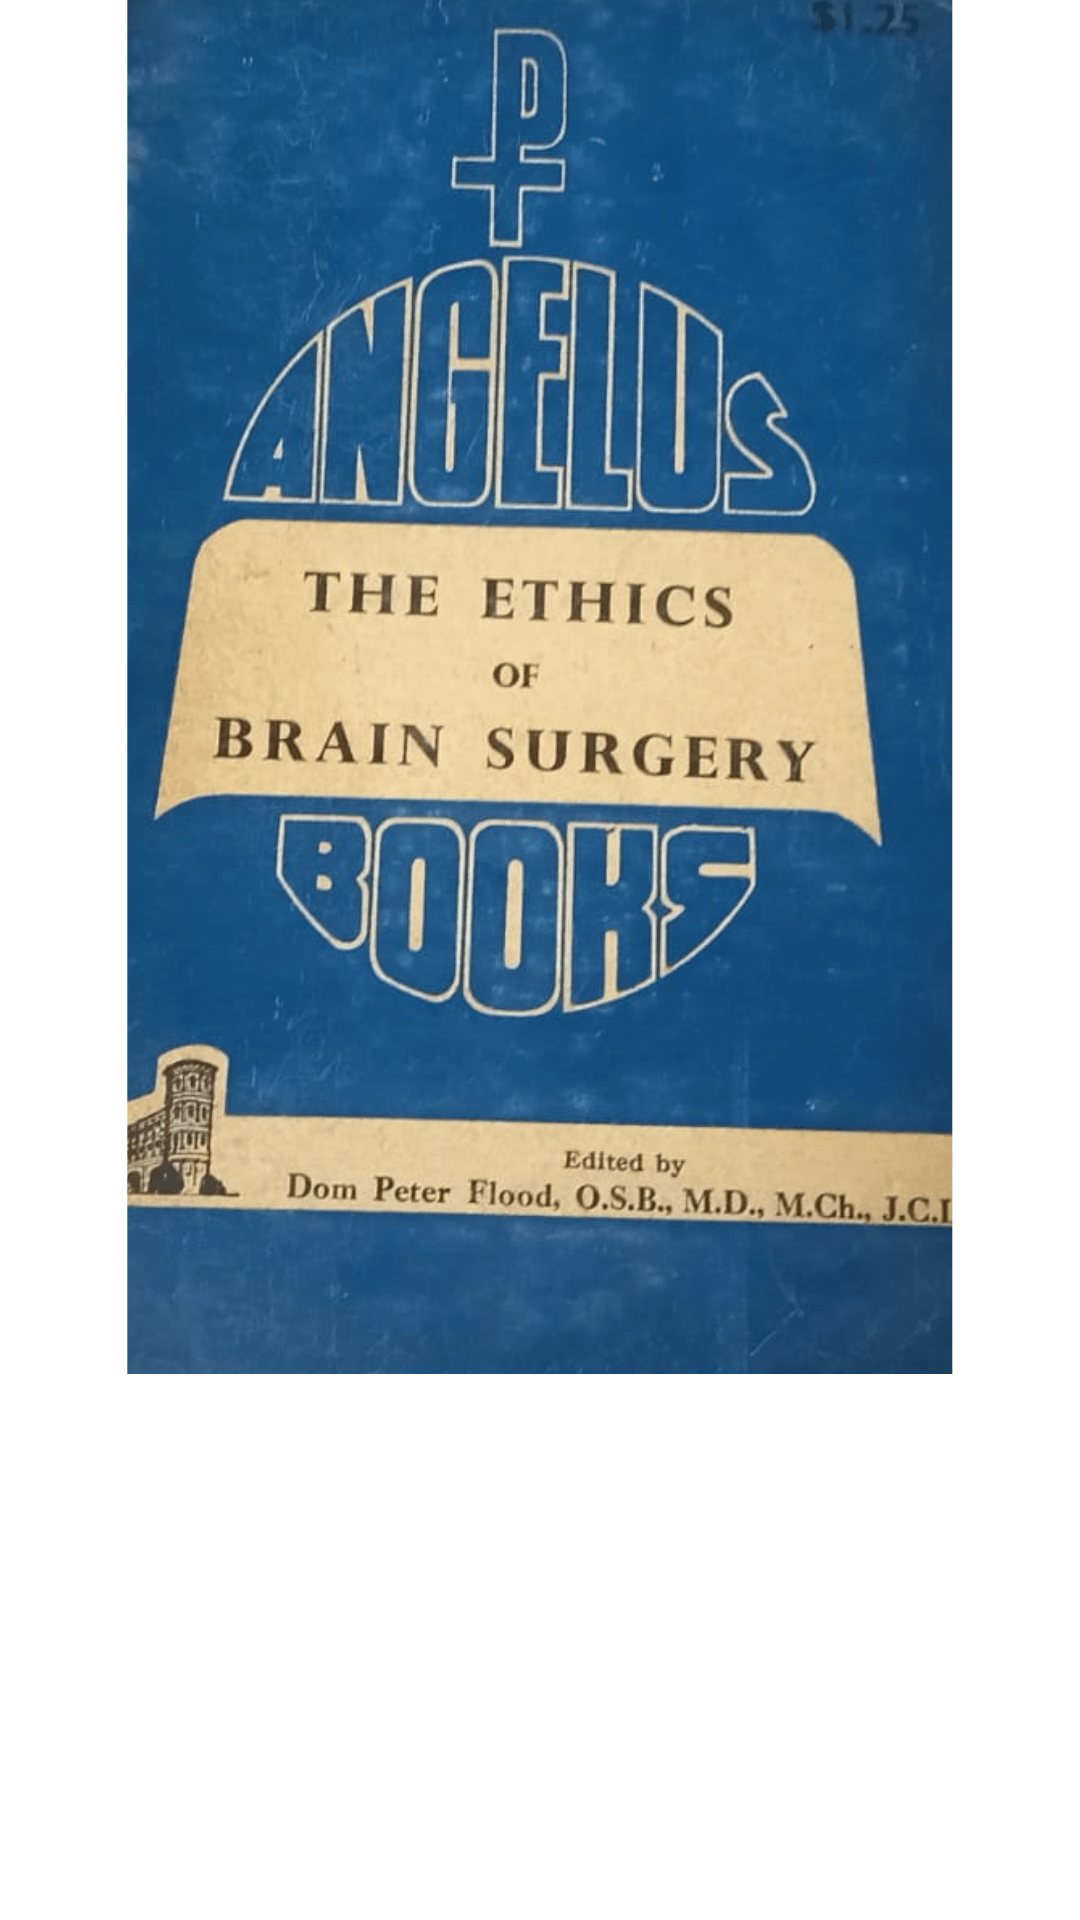 The Ethics of Brain Surgery